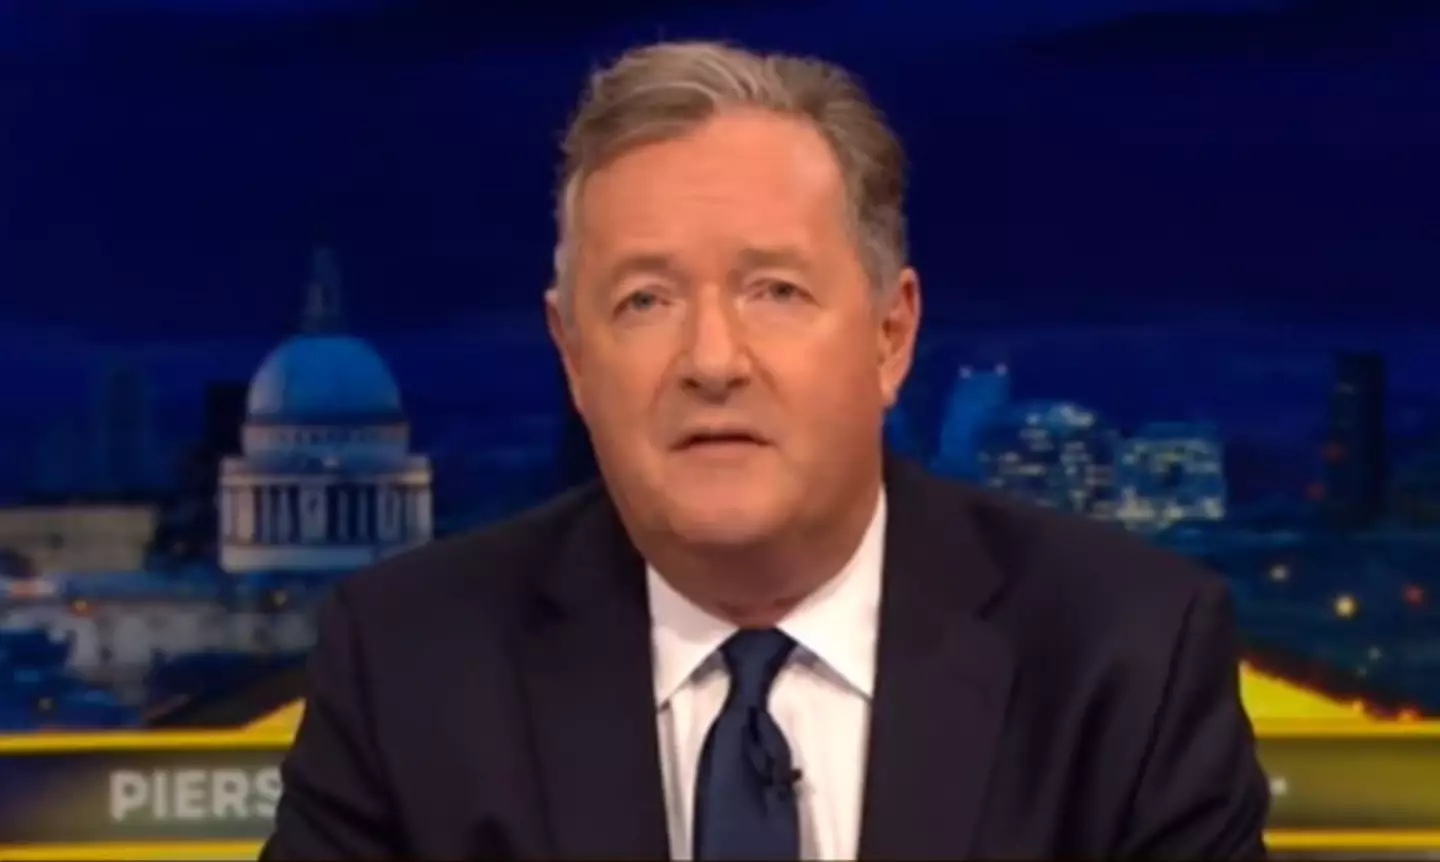 Piers Morgan has questioned the ‘relentless persecution’ of Schofield.